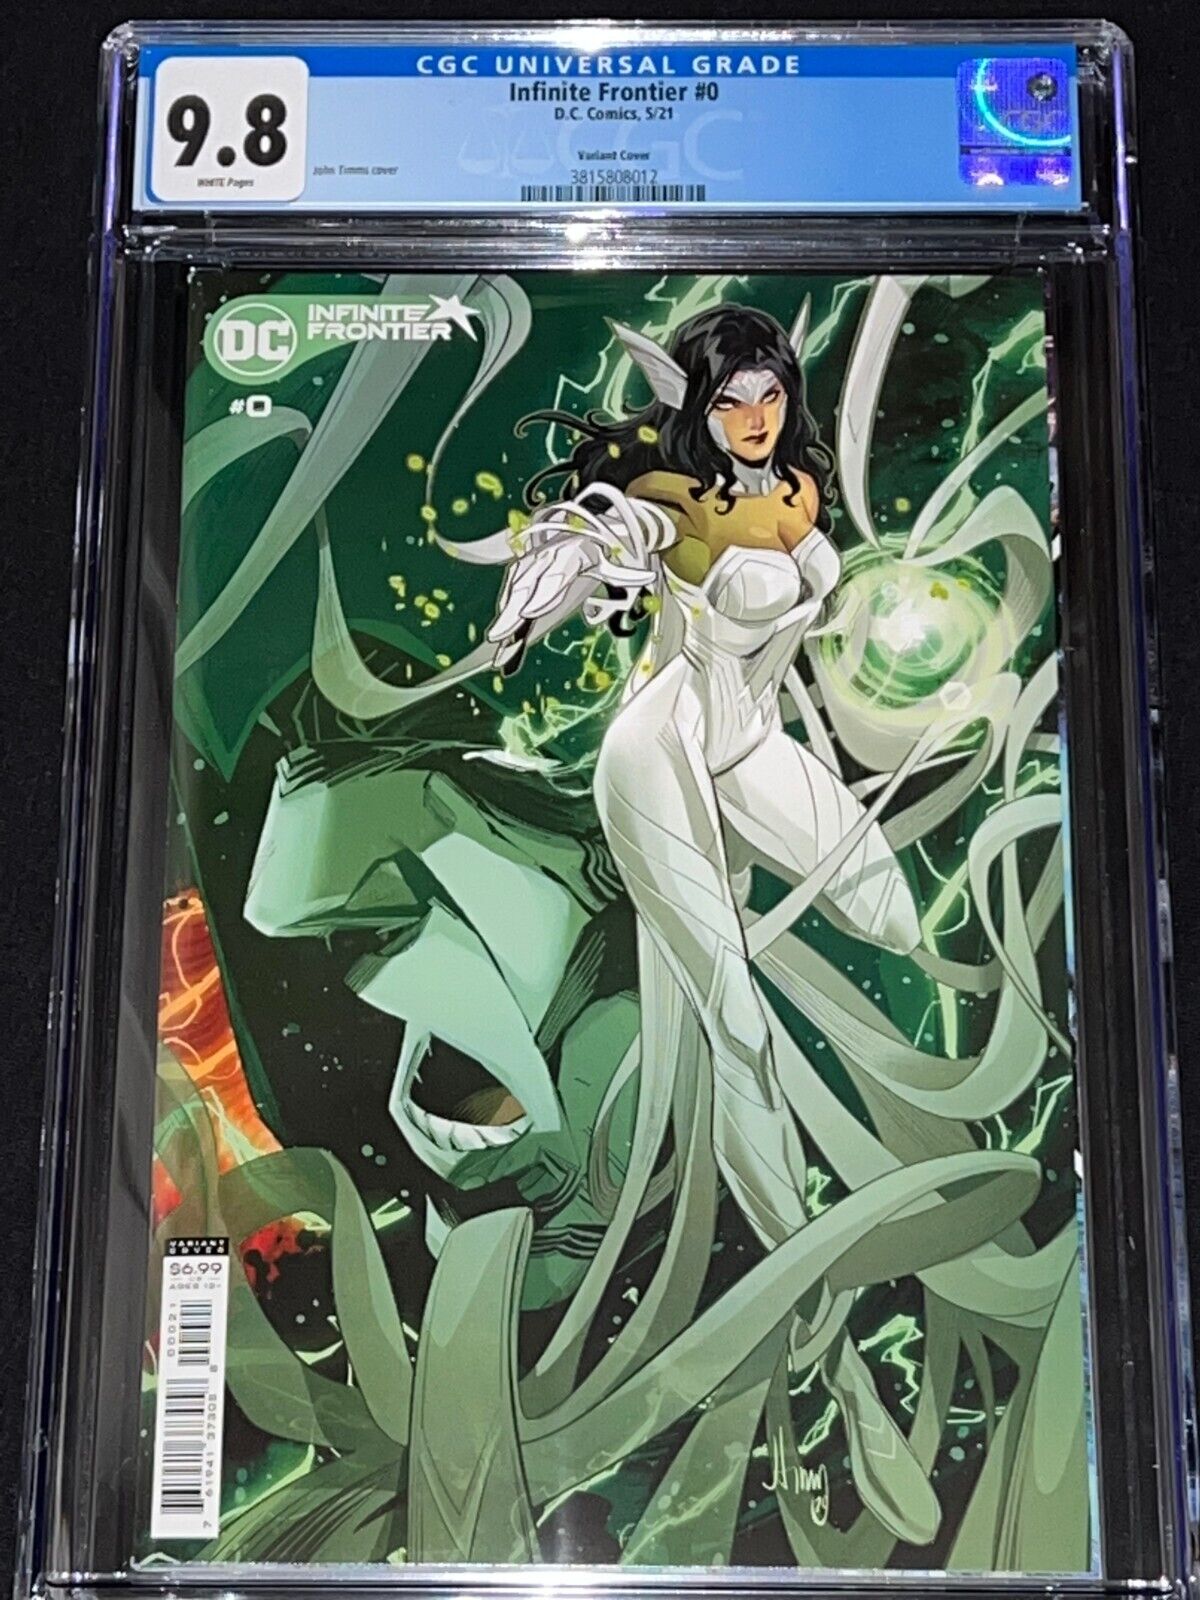 Infinite Frontier #0 CGC 9.8 - John Timms Variant Cover - 2021